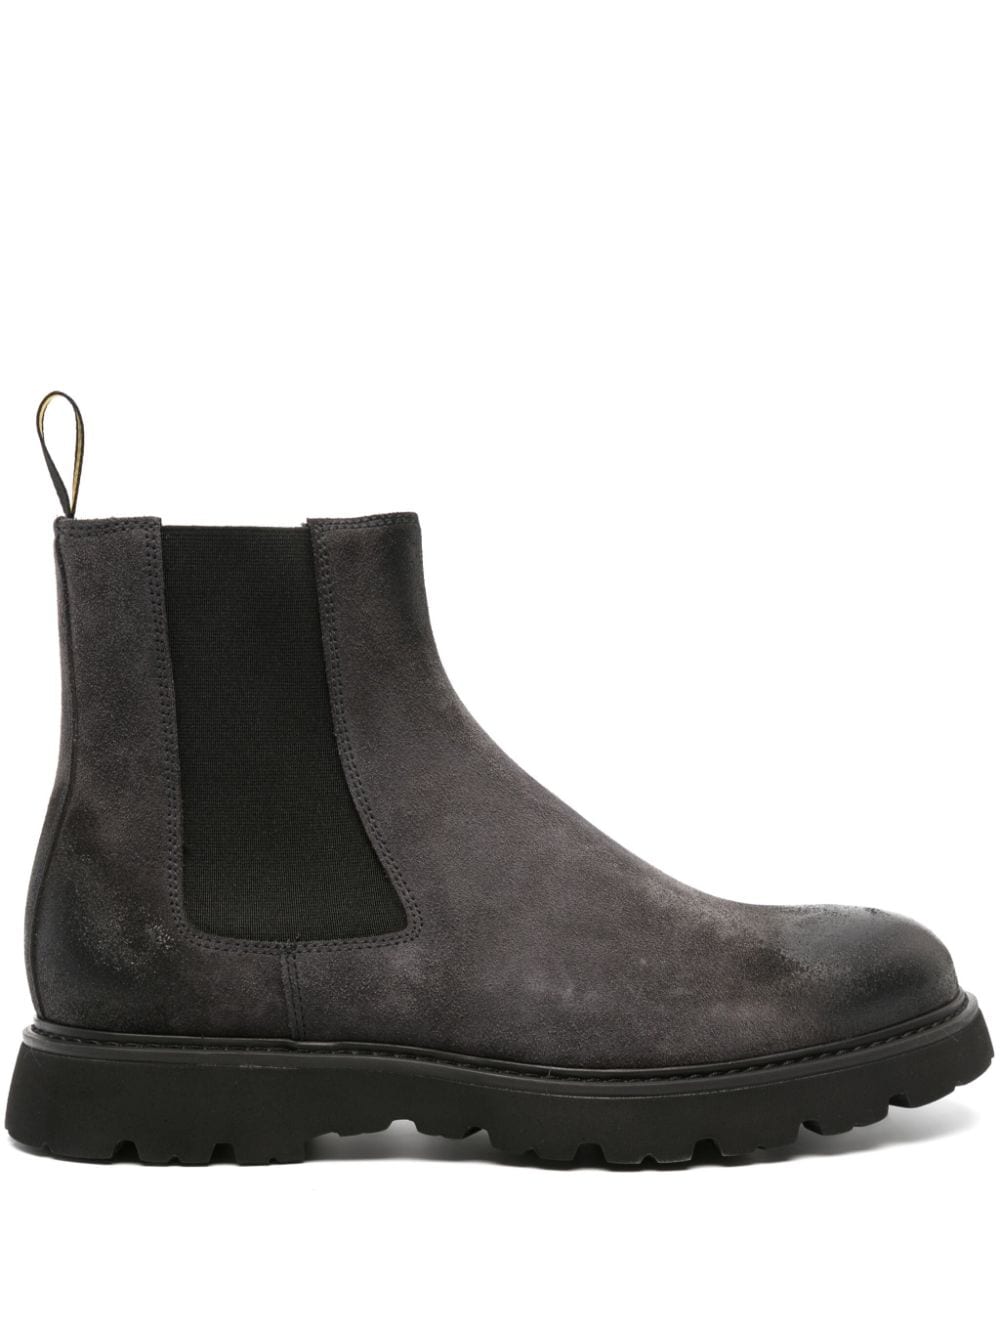 Doucal's burnished-finish suede ankle boots - Grey von Doucal's